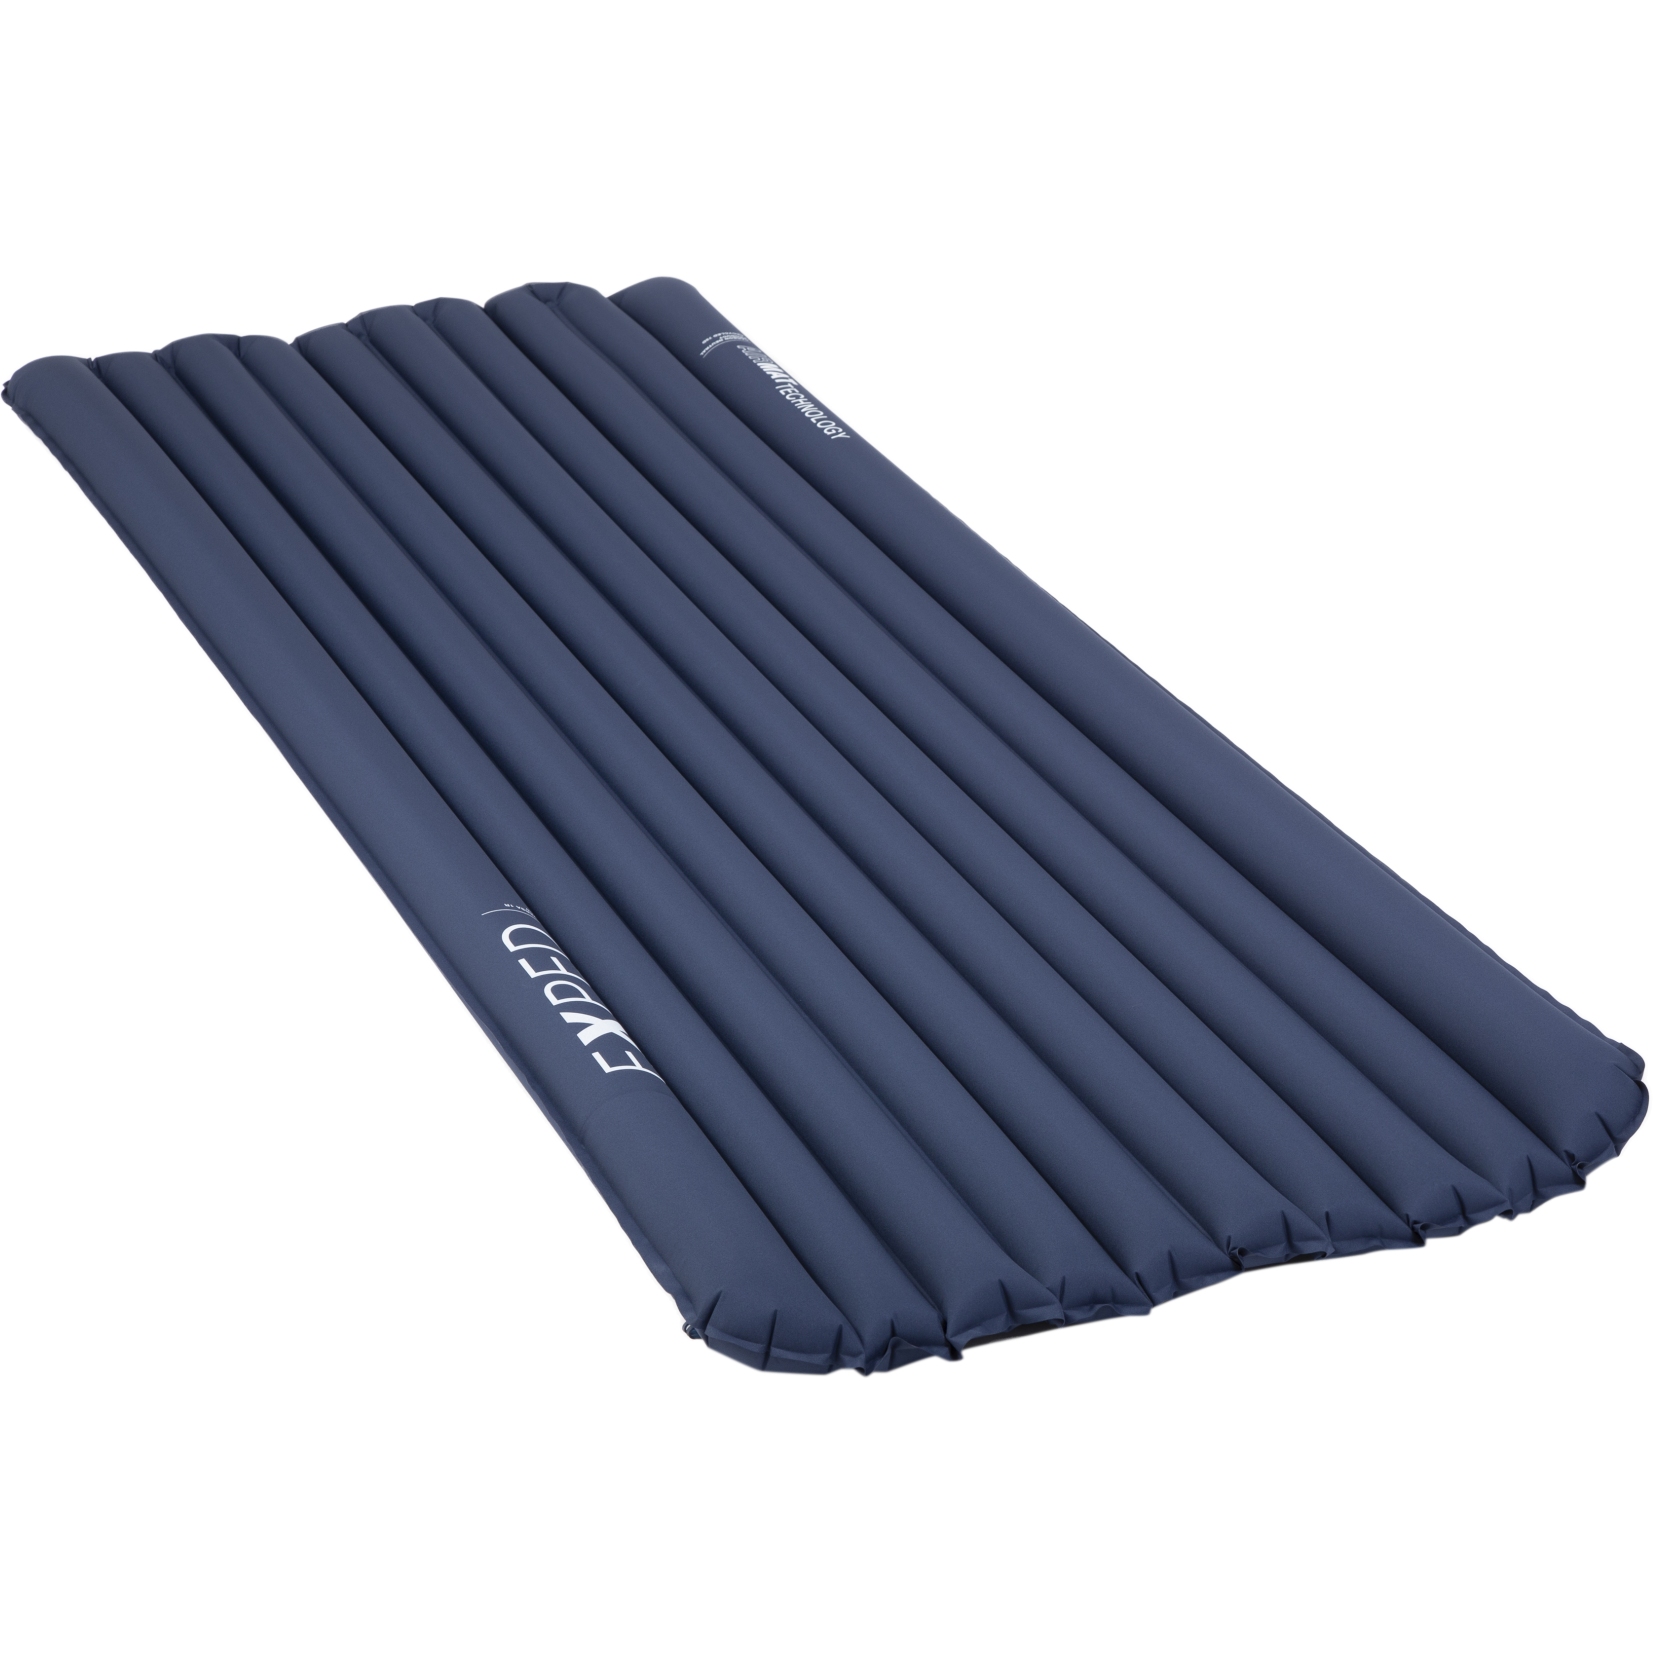 Picture of Exped Versa 1R Sleeping Mat - LW - navy